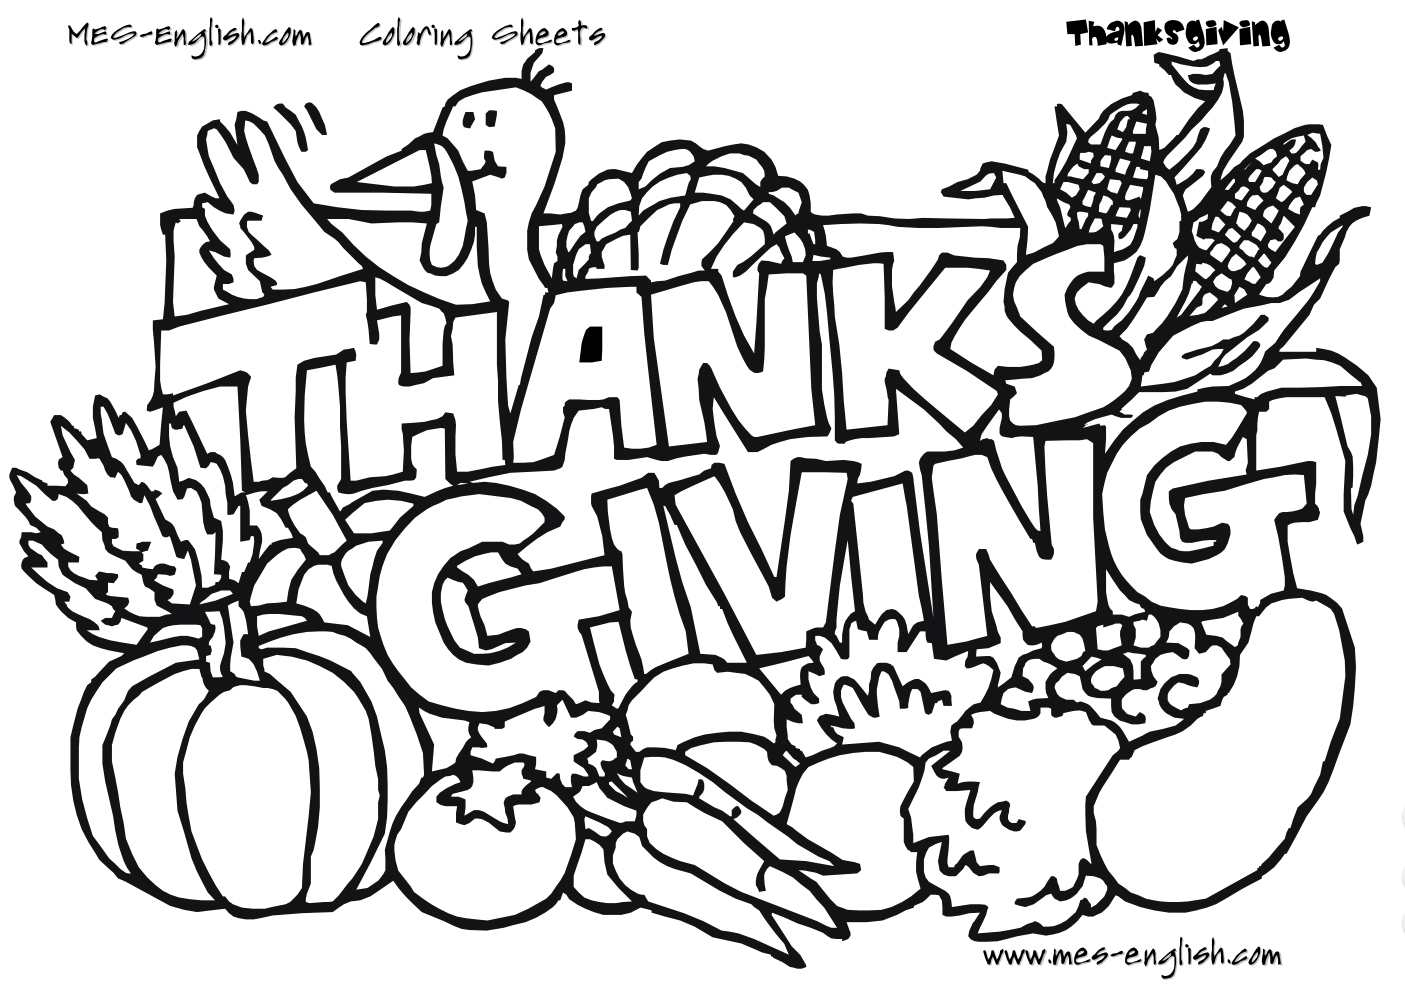 Free Thanksgiving Coloring Pages For Kids - Free Printable Turkey Coloring Pages